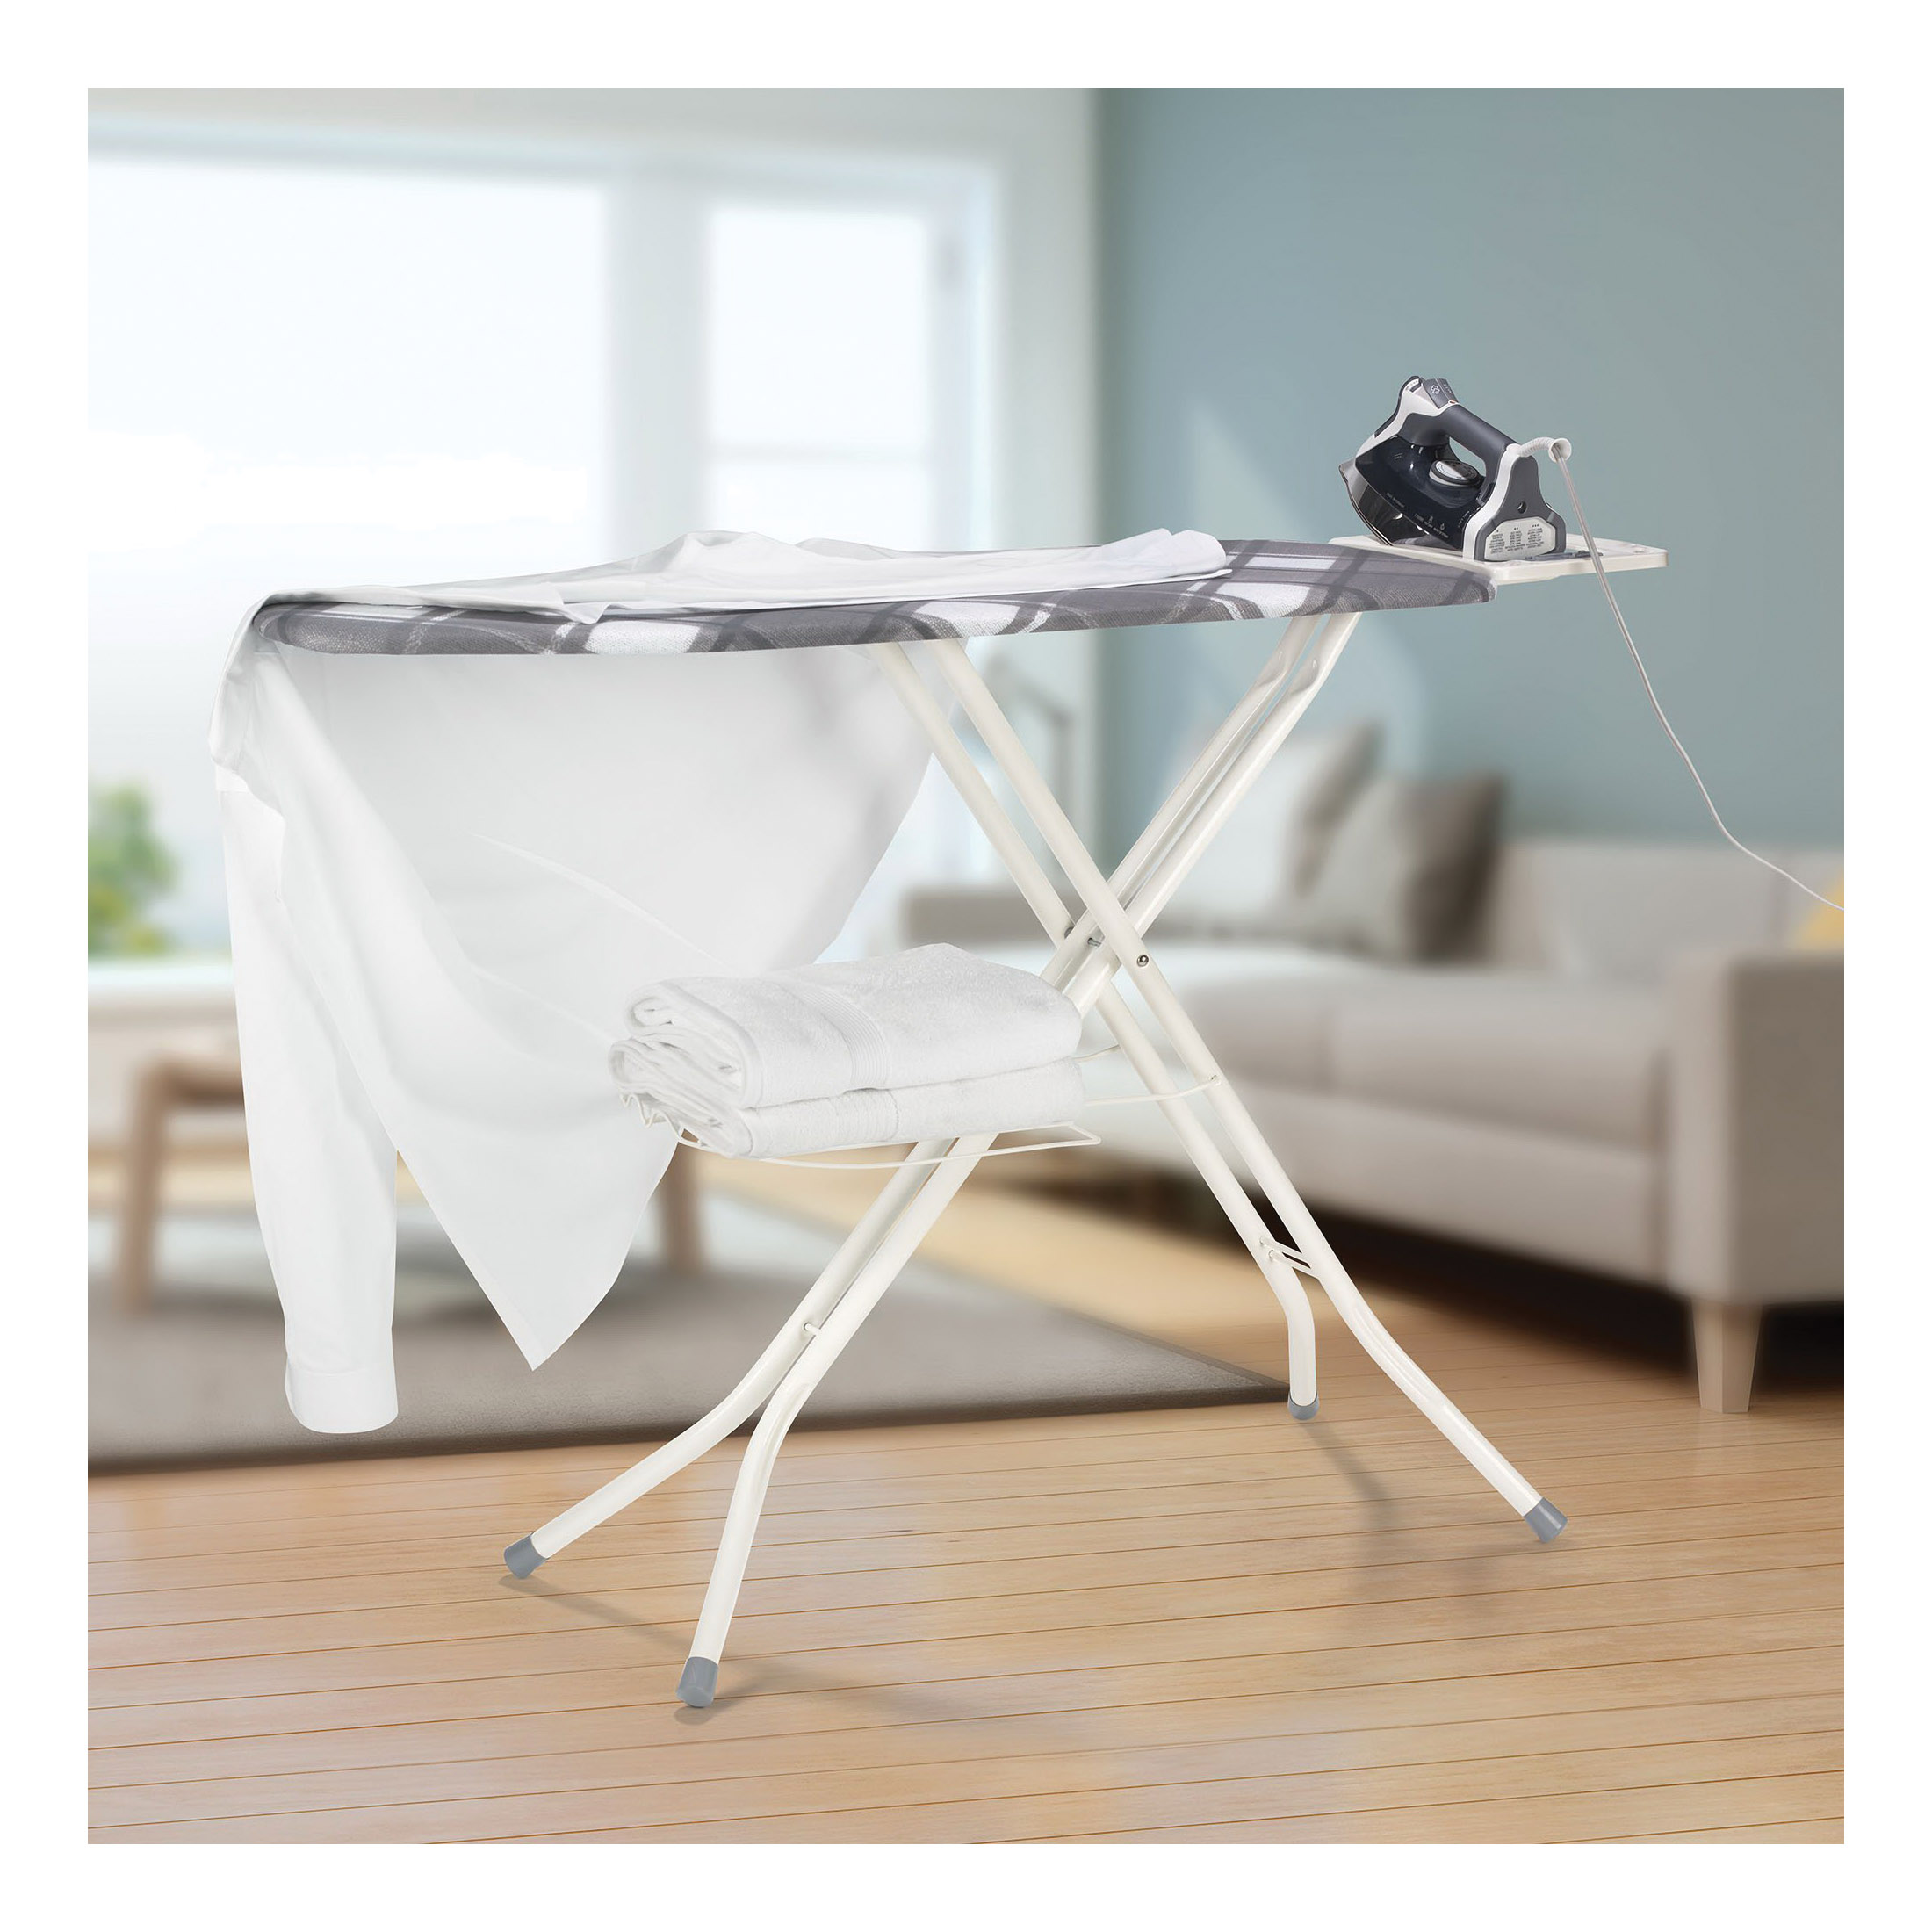 Polder Products IB-1558RM Deluxe Ironing Station, Steel Board - 1